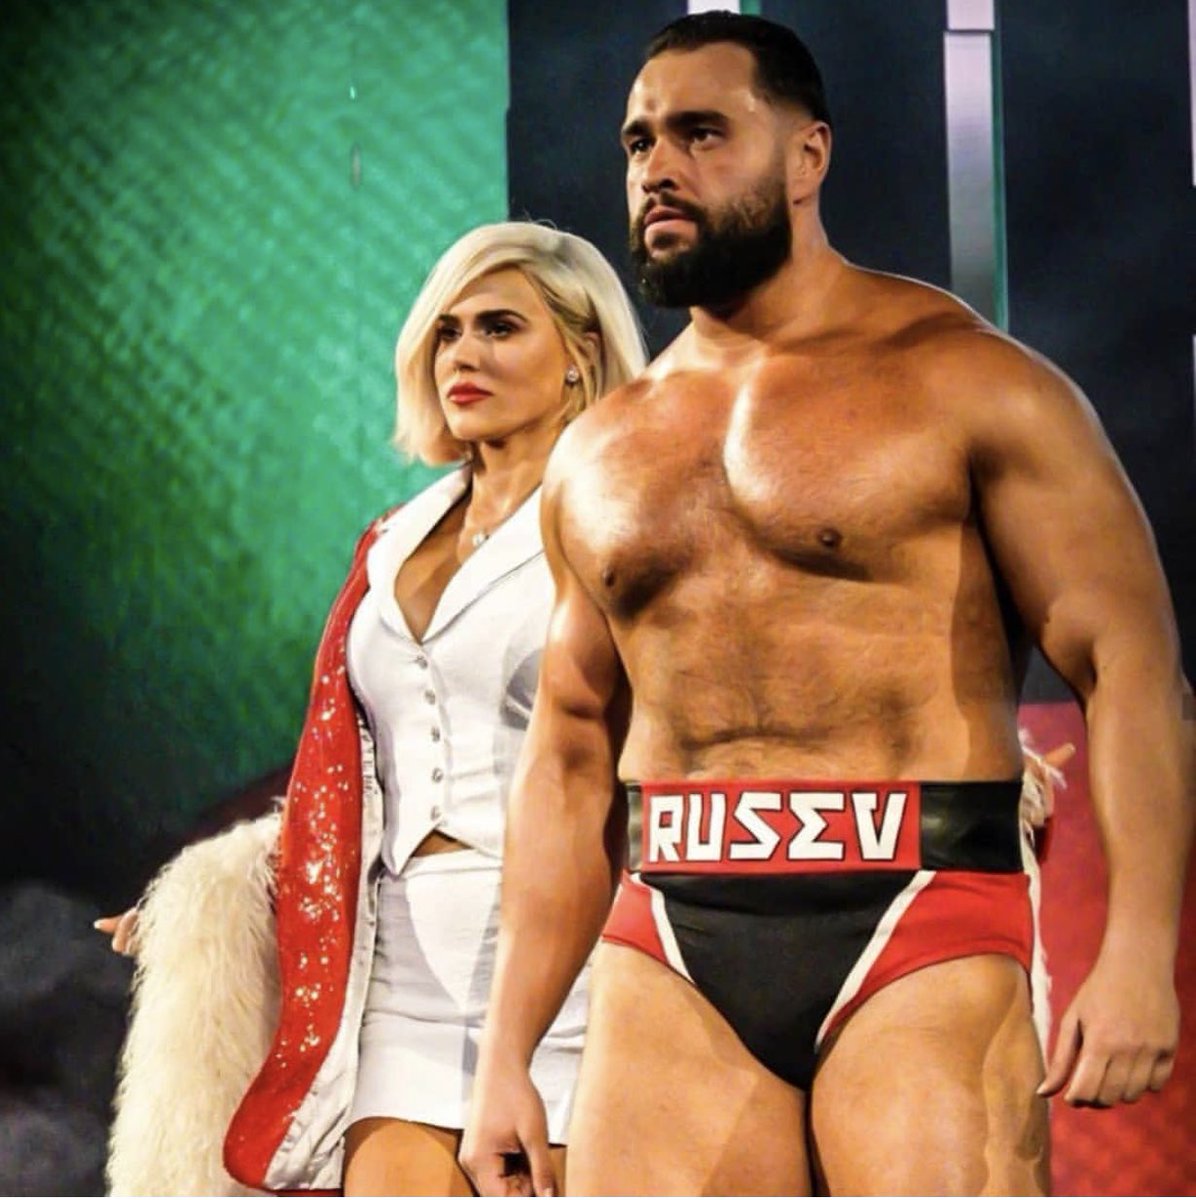 RT @LanaWWE: Since Day 1 and forever ❤️???? https://t.co/dNjFINTMbz